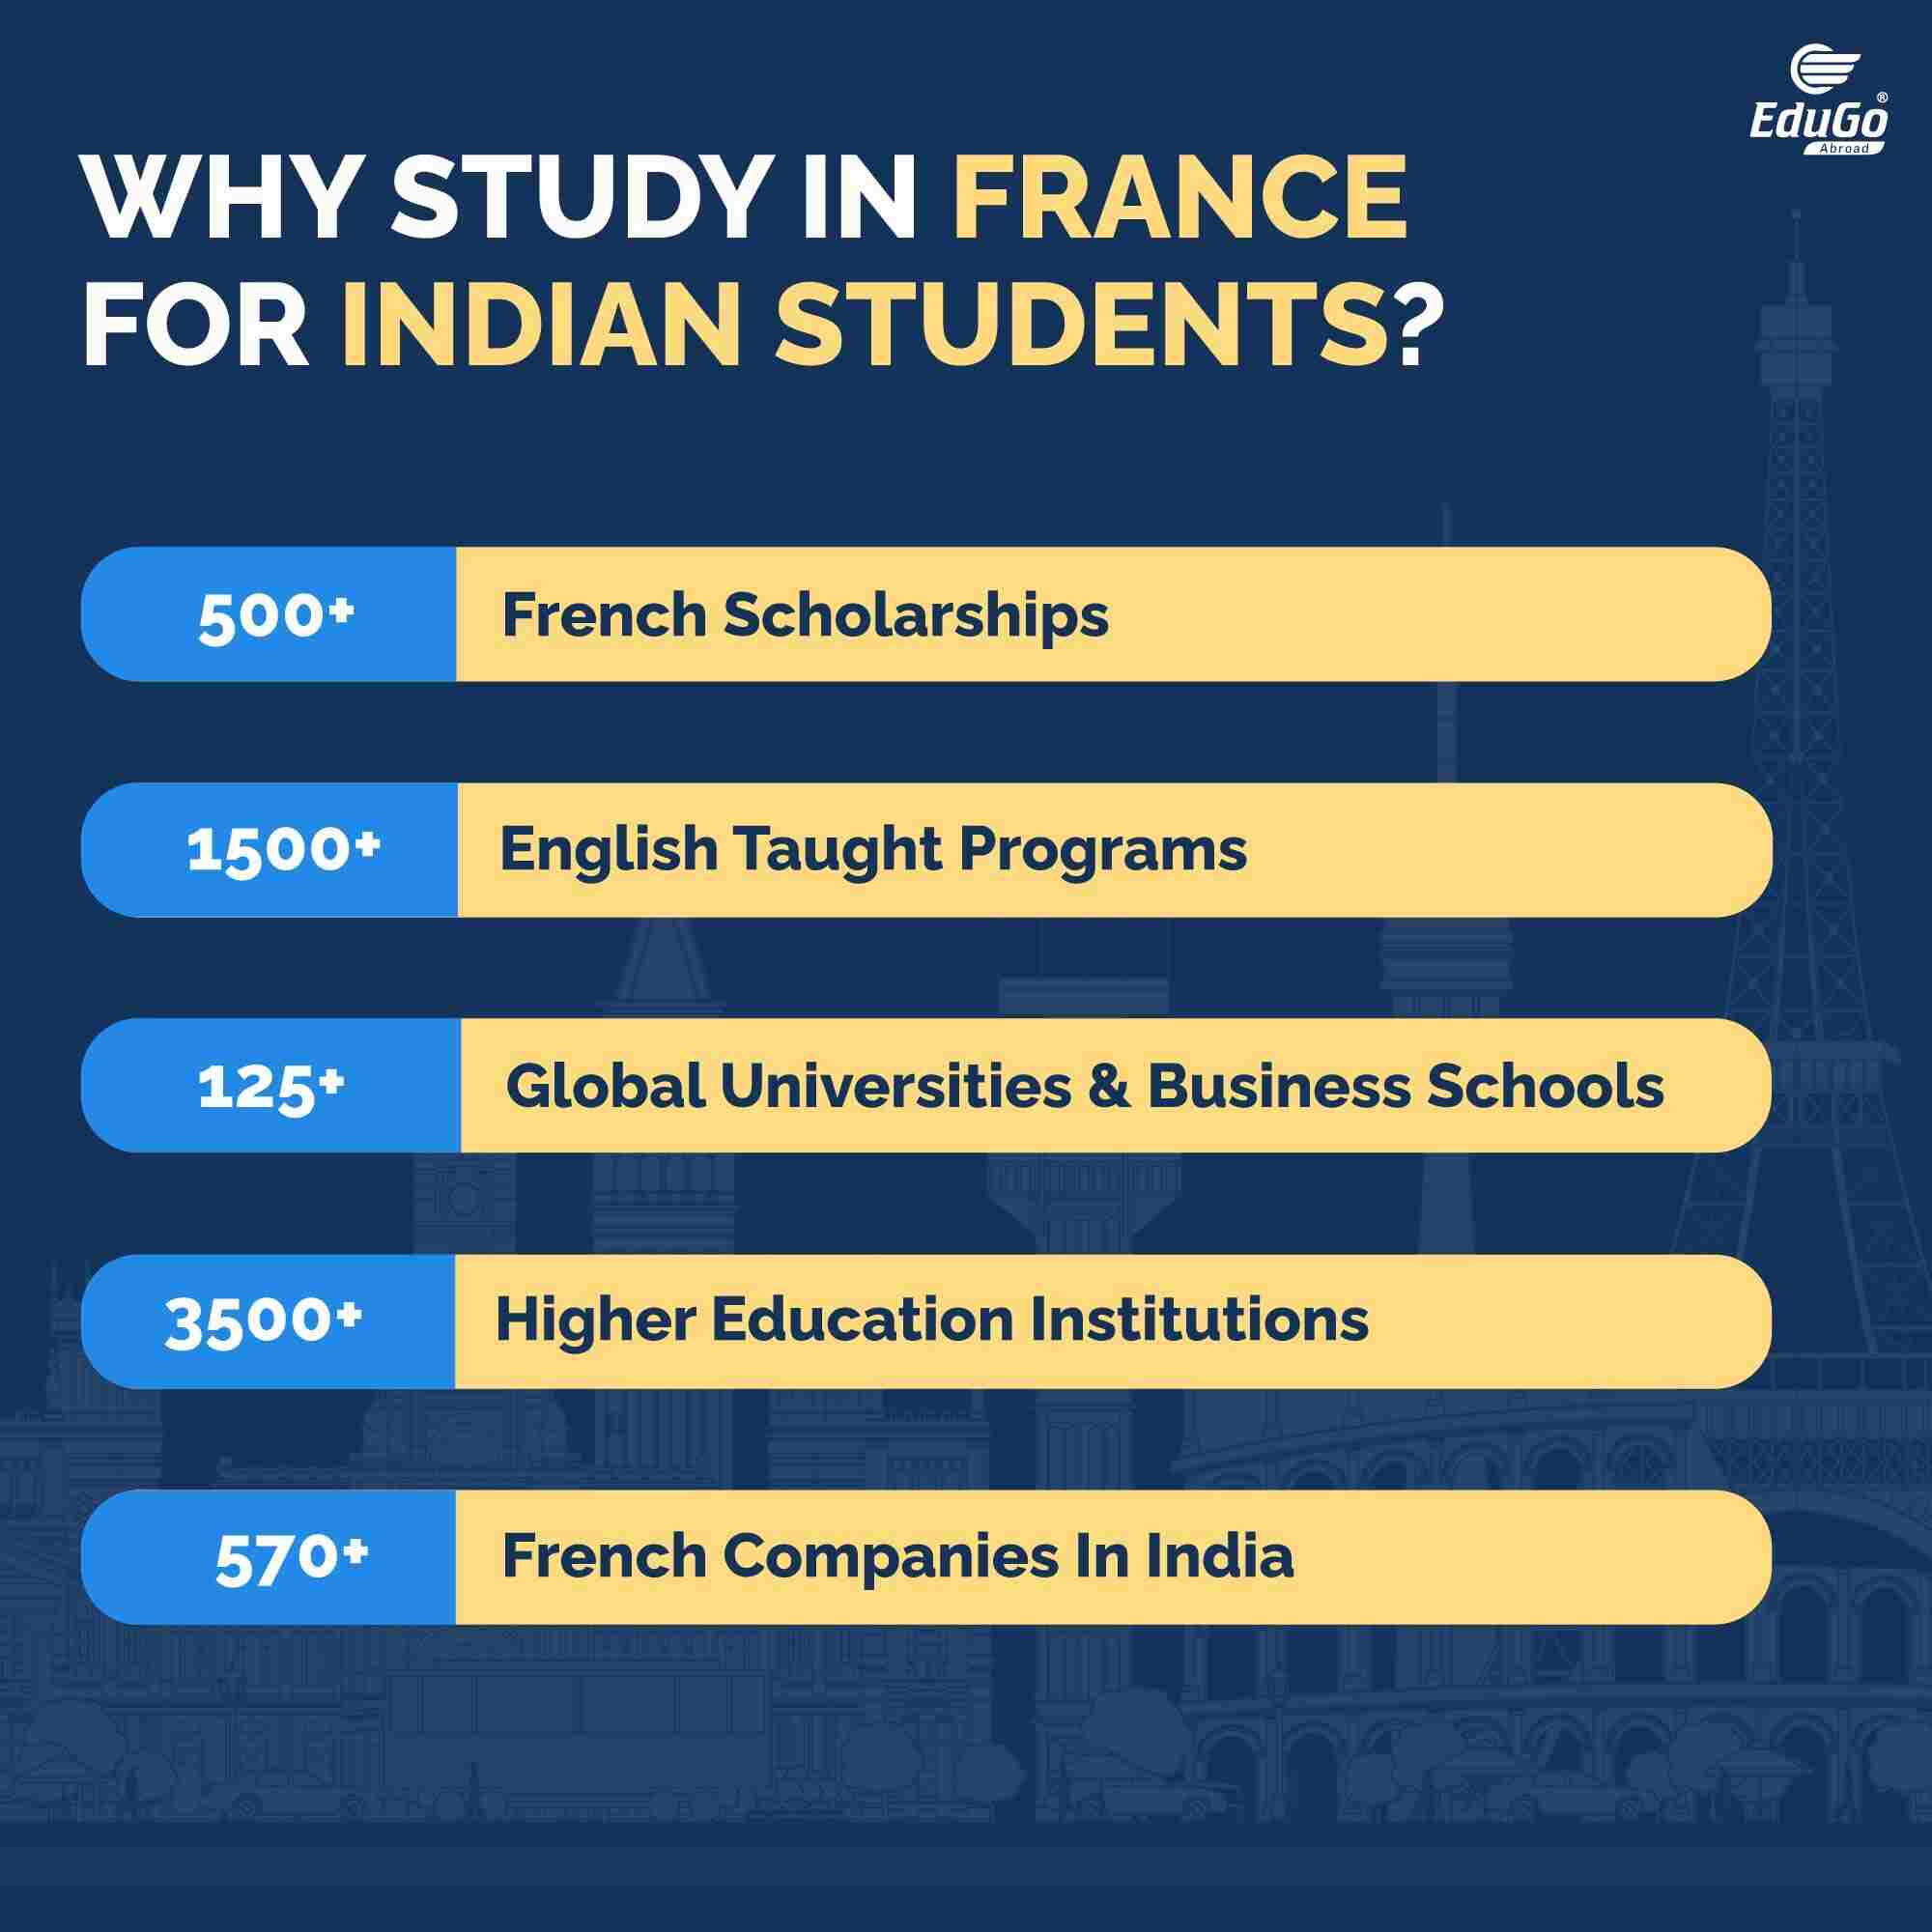 Why Study in France for Indian Student